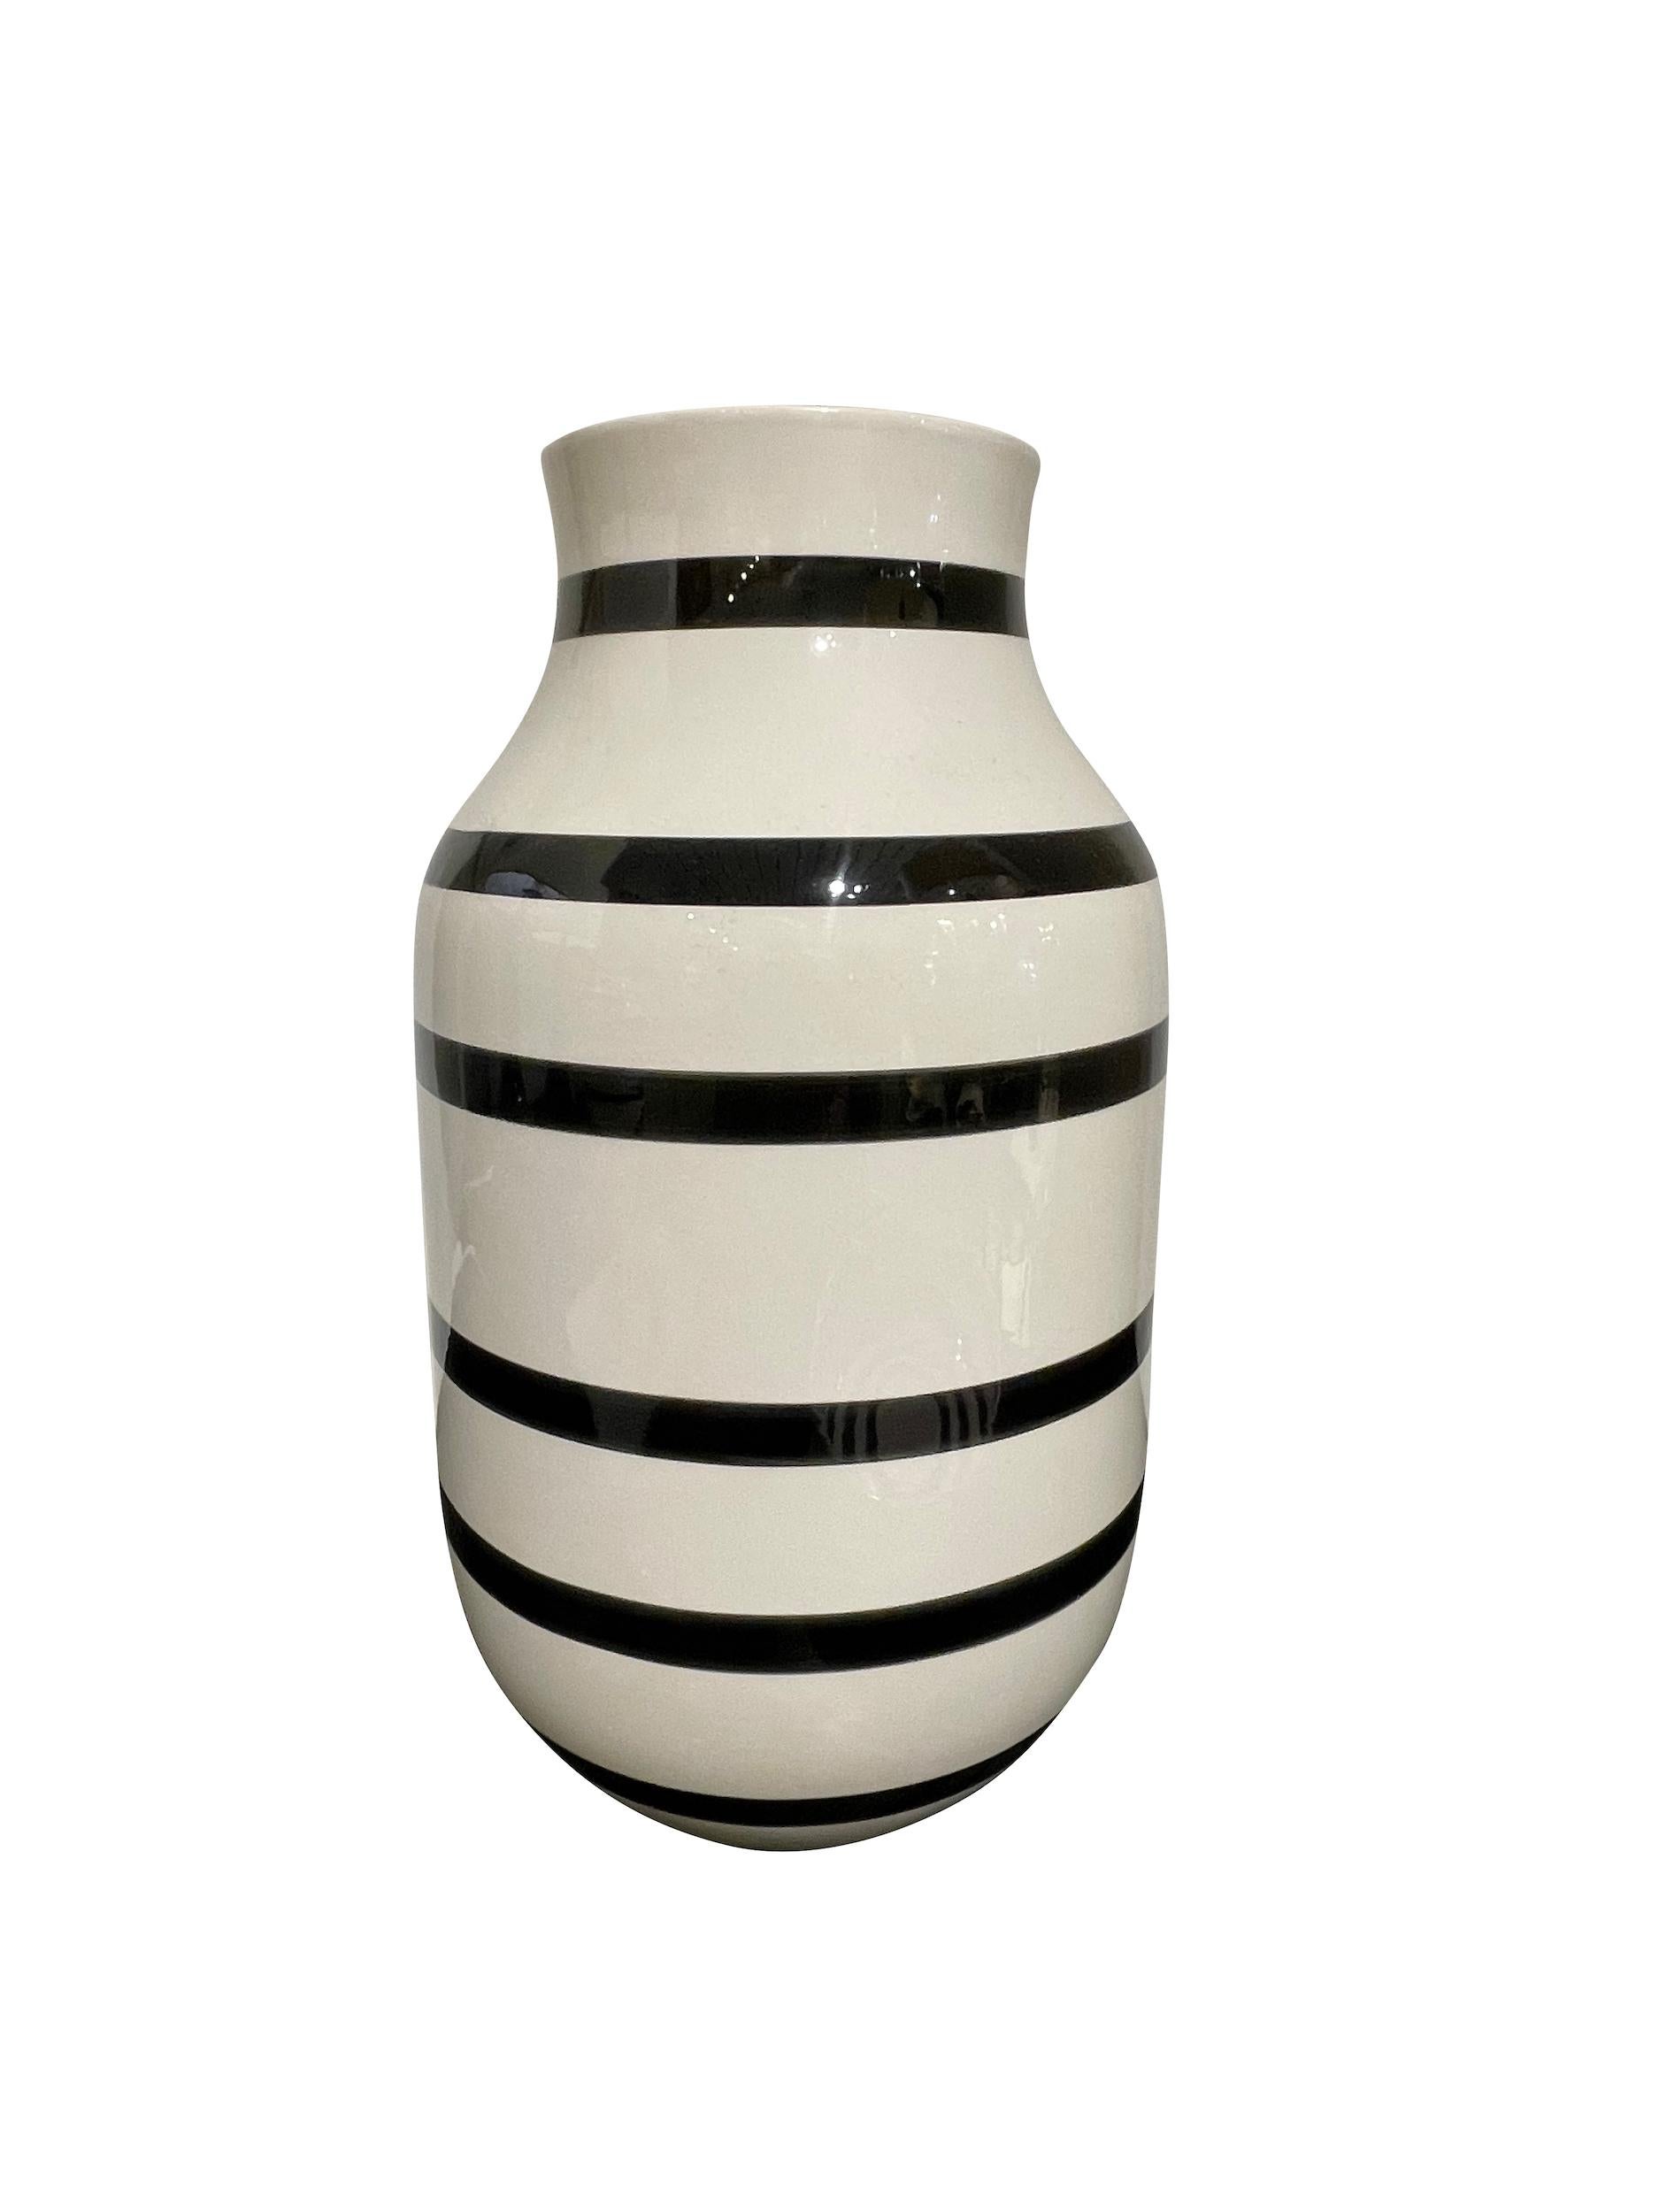 Mid century Danish horizontal stripe vase.
Cream ground with black stripes.
Can hold water.
ARRIVING AUGUST